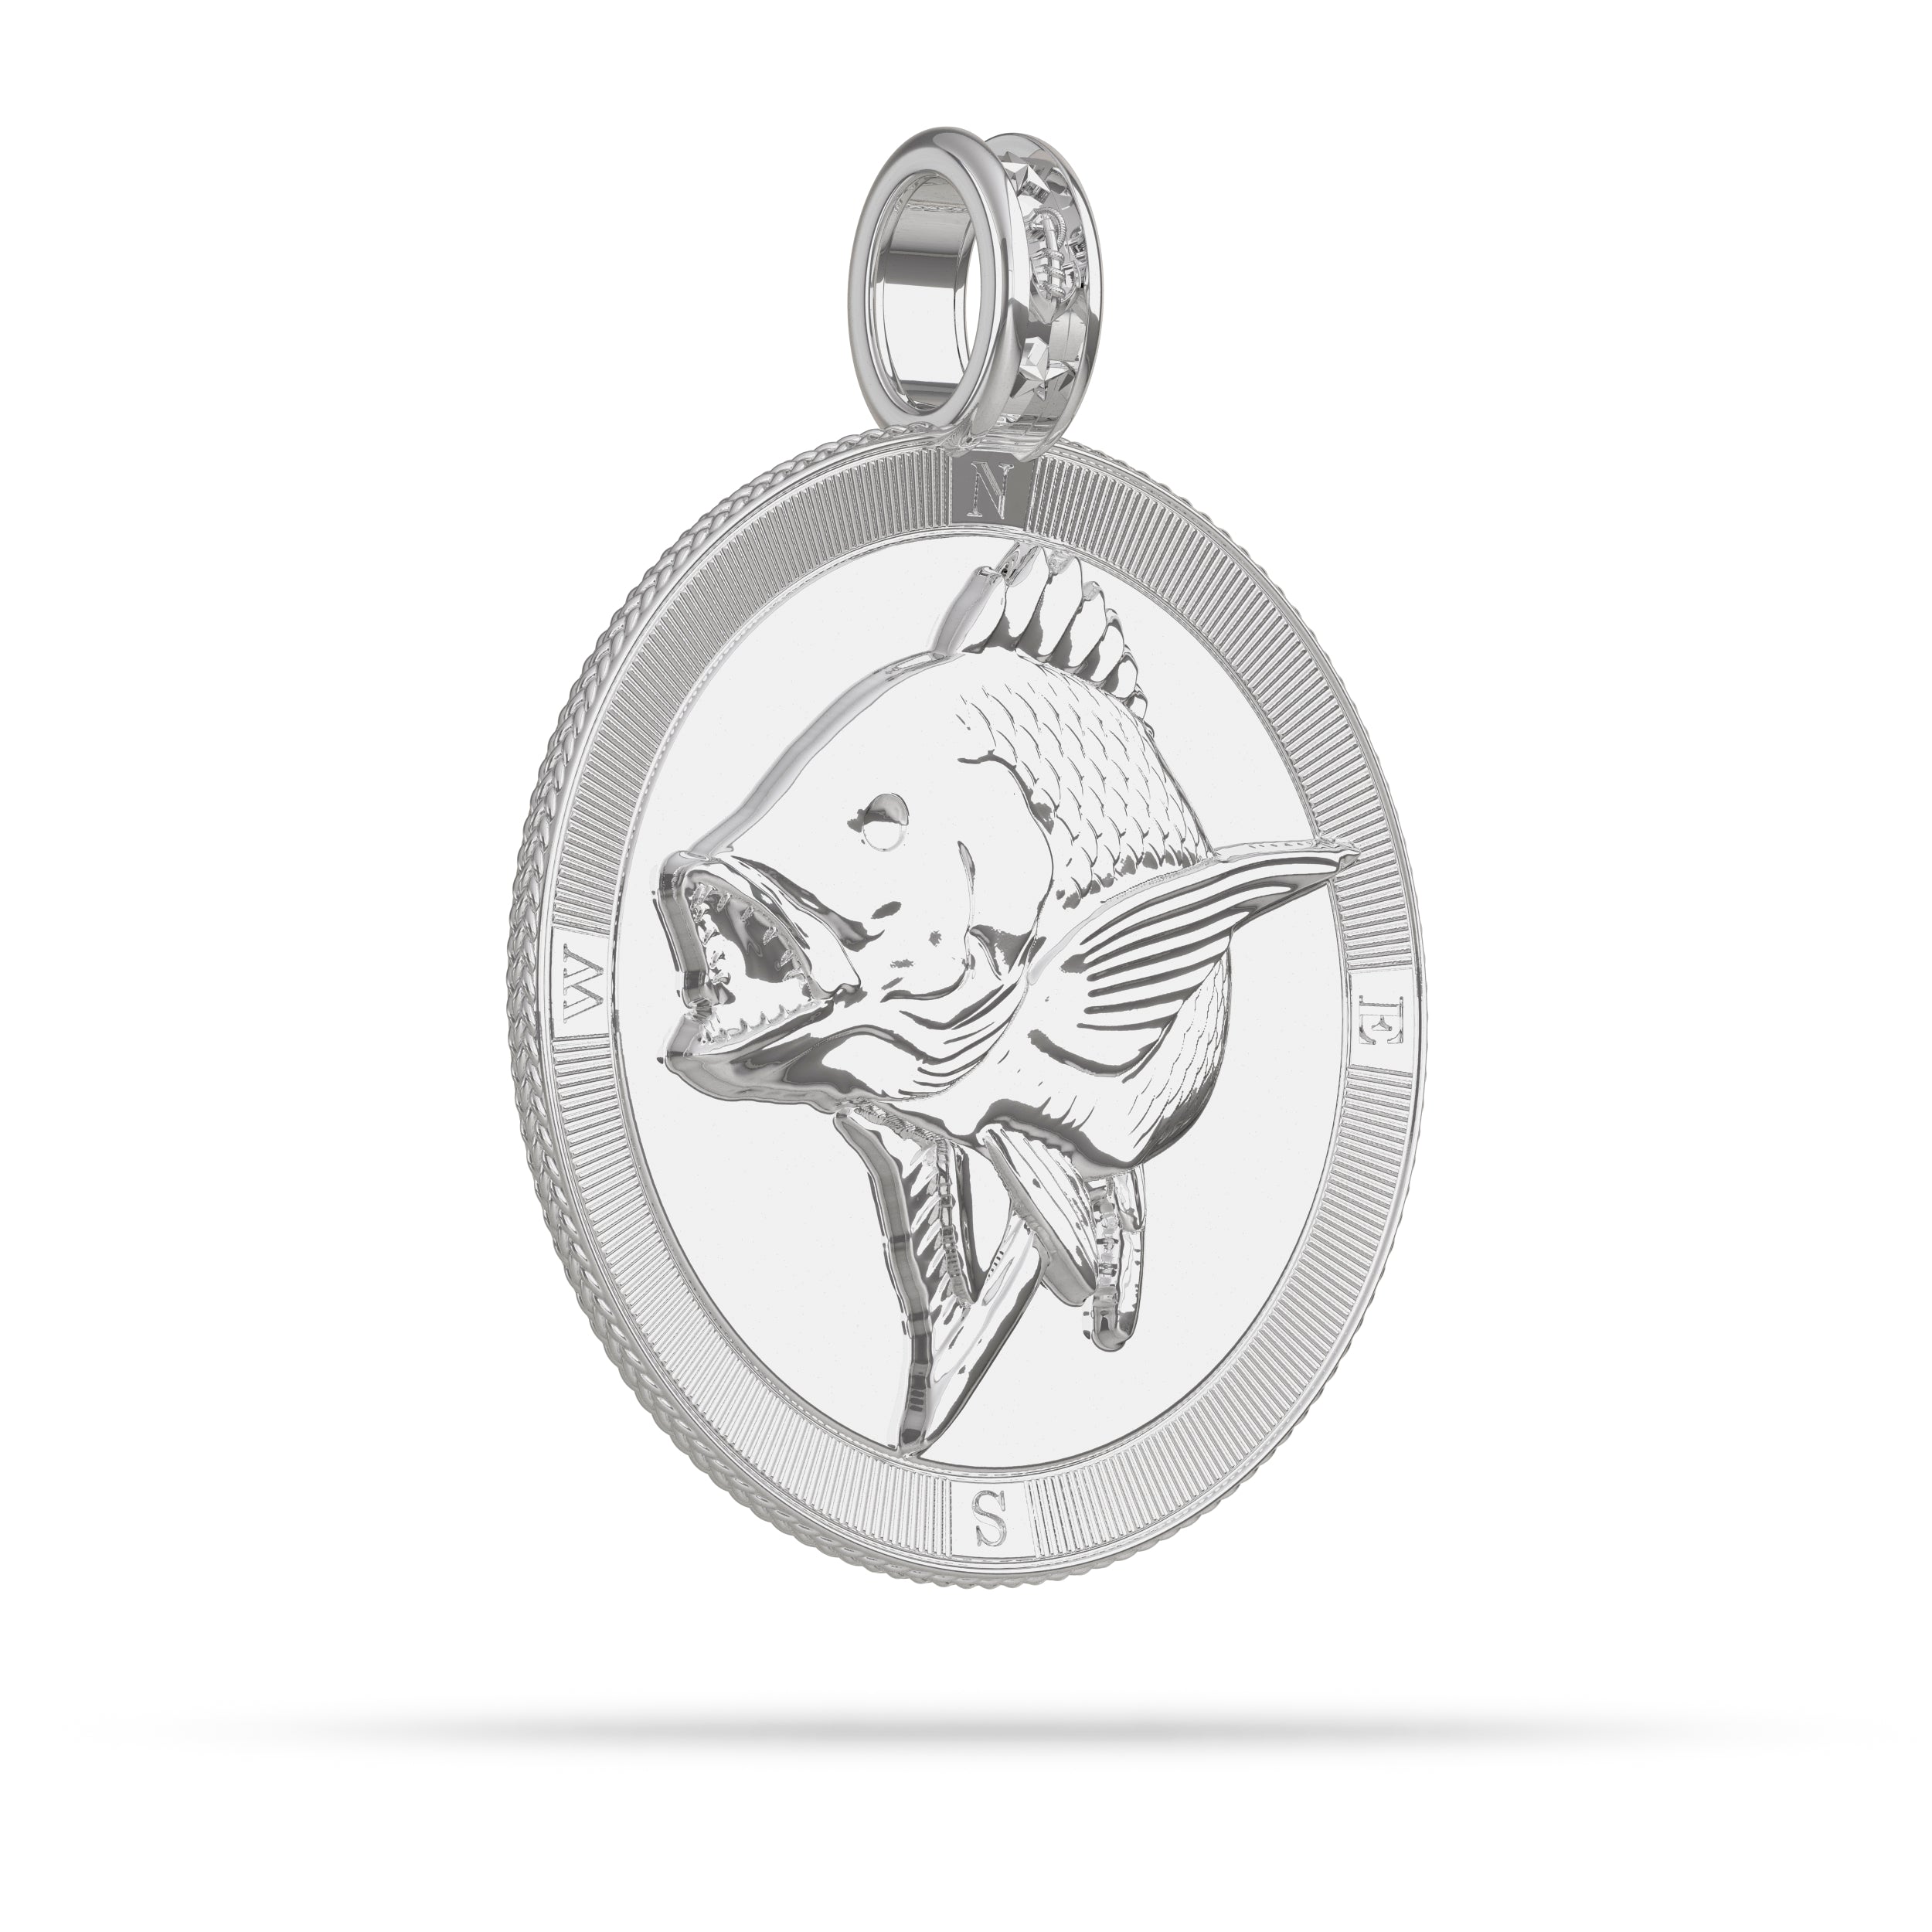 Red Snapper Compass Medallion Pendant Large in Sterling Silver by Nautical Treasure